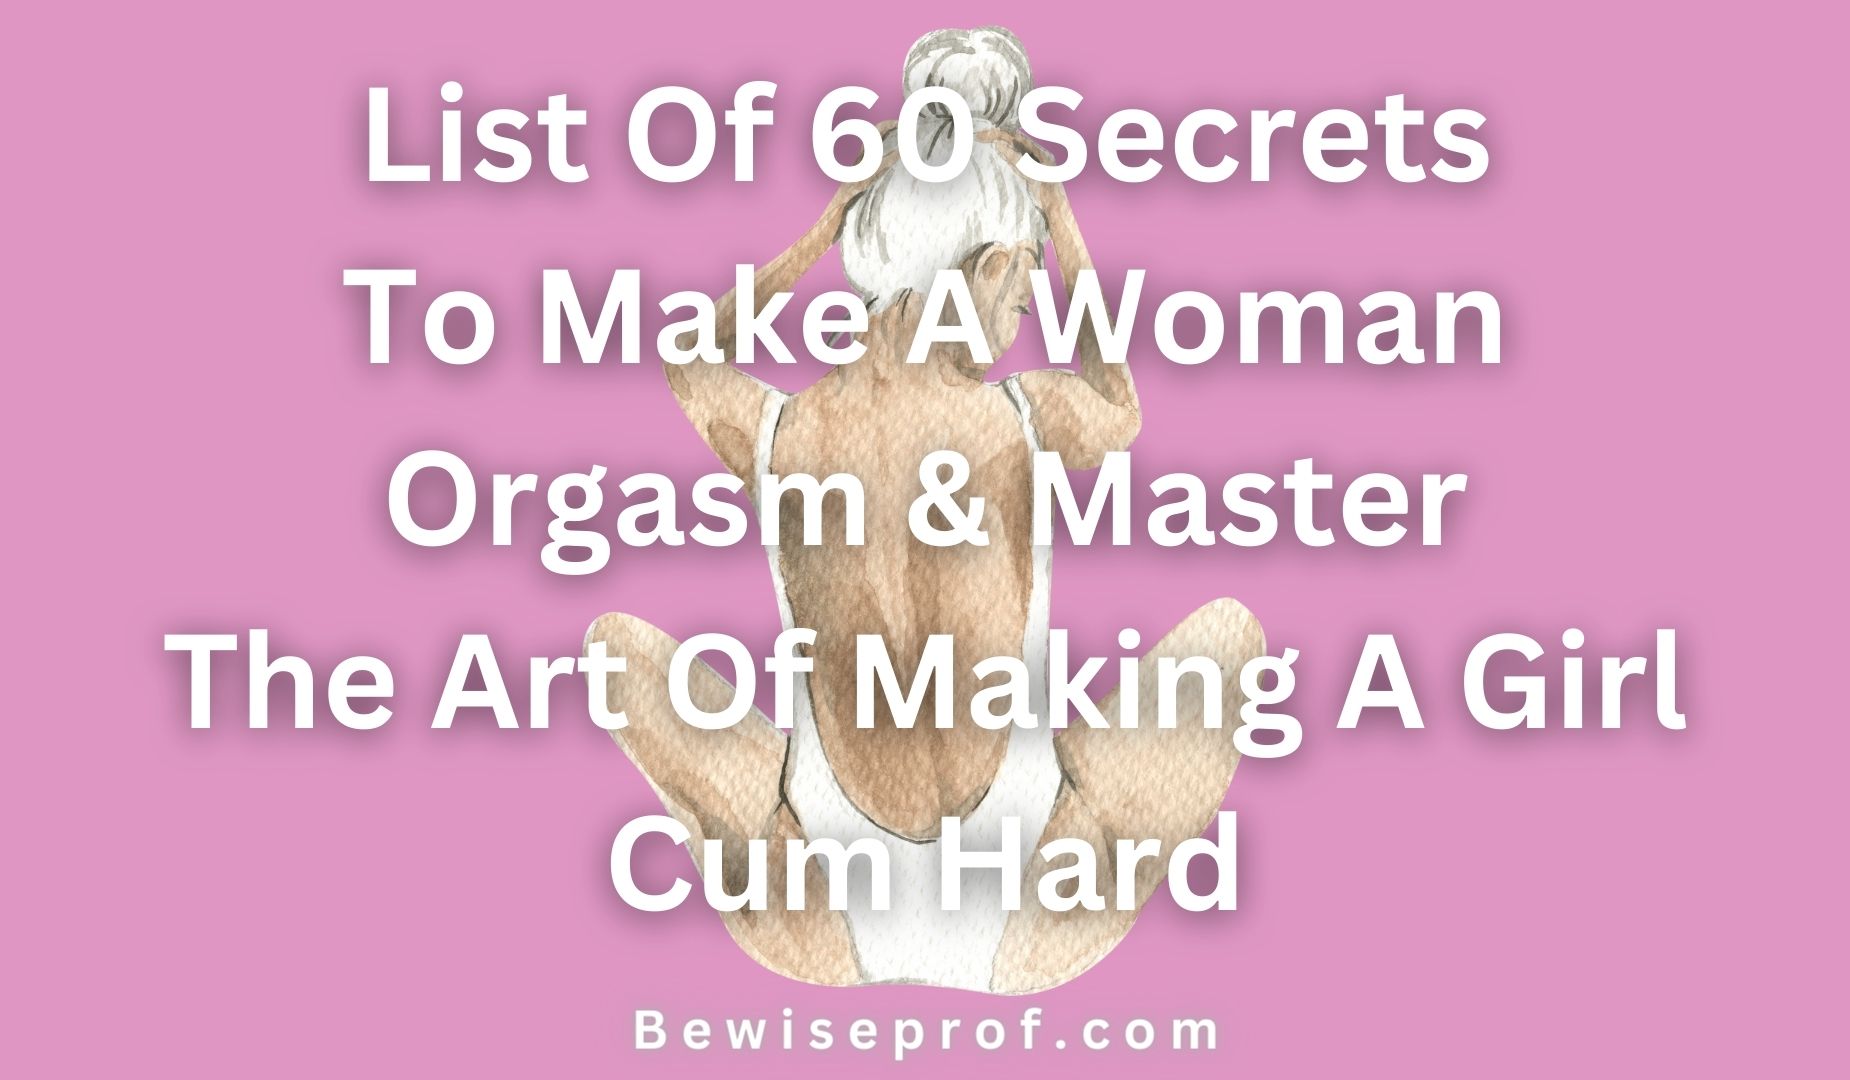 List Of 60 Secrets To Make A Woman Orgasm & Master The Art Of Making A Girl Cum Hard